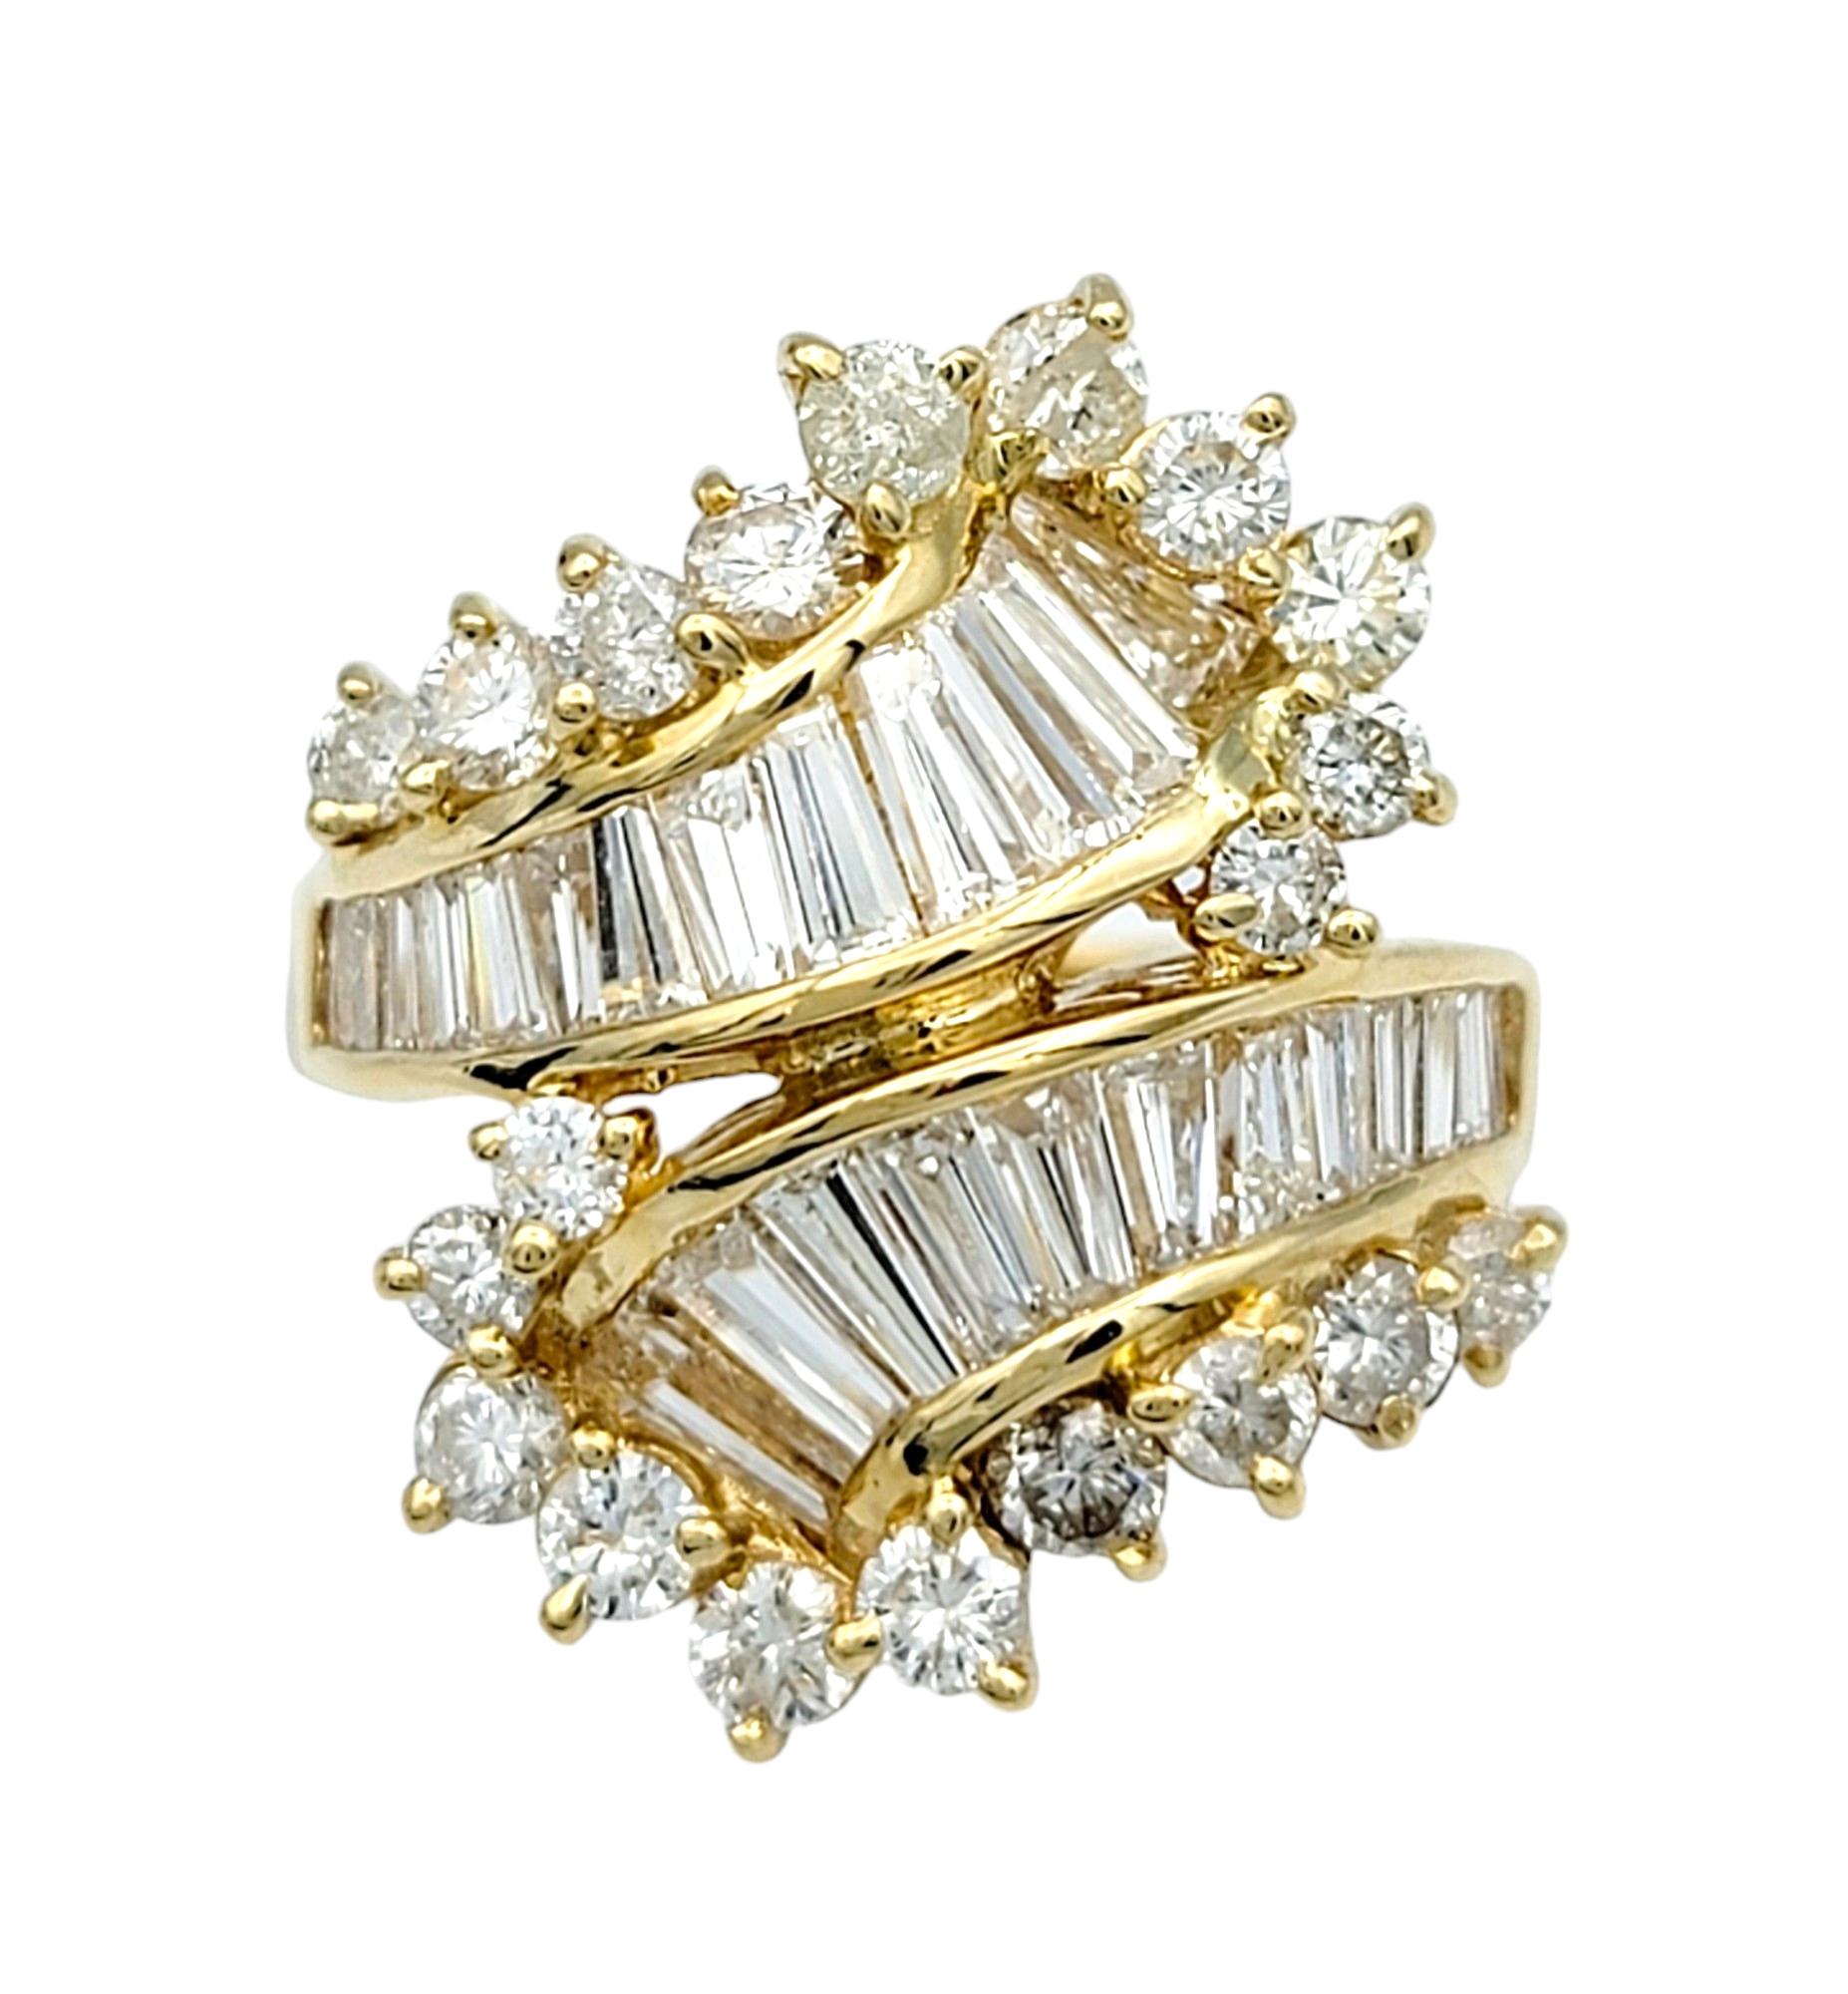 Ring Size: 5.25

This captivating diamond ring crafted in lustrous 14 karat yellow gold embodies understated elegance with a touch of modern flair. Mimicking the graceful movement of a bypass design, the ring features a mesmerizing arrangement of